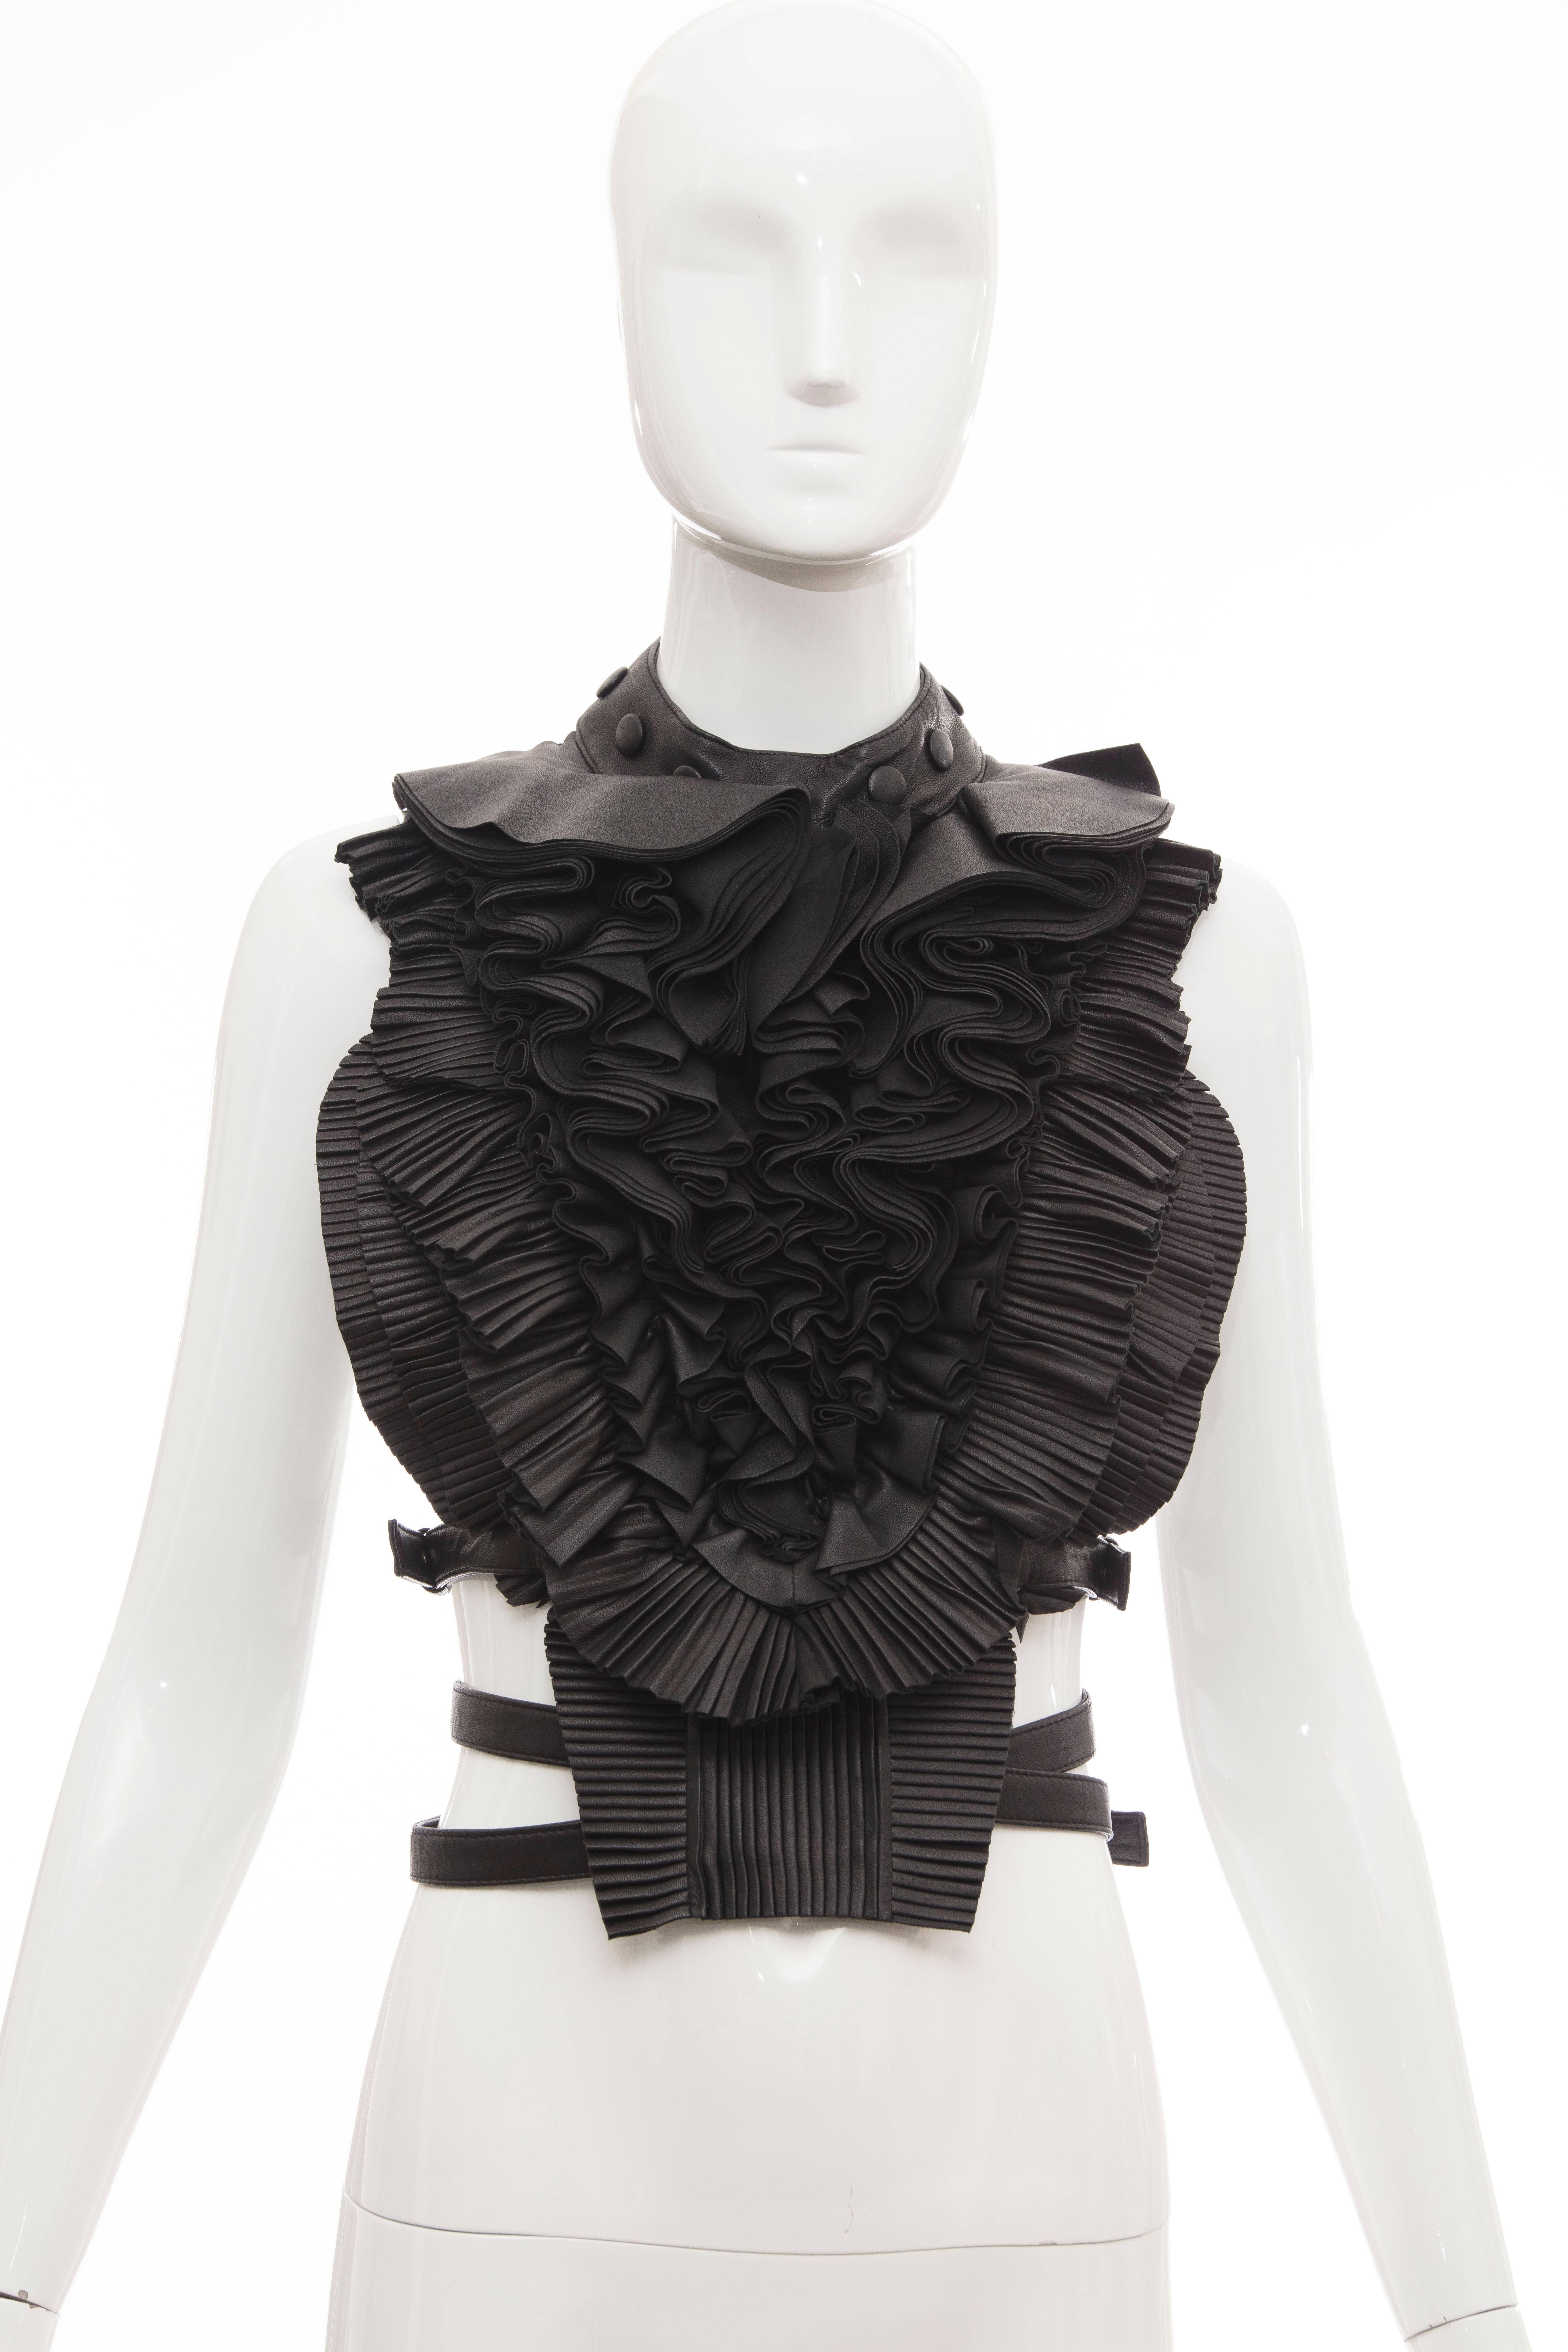 Riccardo Tisci for Givenchy runway (Look 16) black leather pleated ruffle harness top with scoop neck, open back and adjustable metal buckle closures throughout and fully lined.

The harness top is part of the FIT Museum's collection.

One